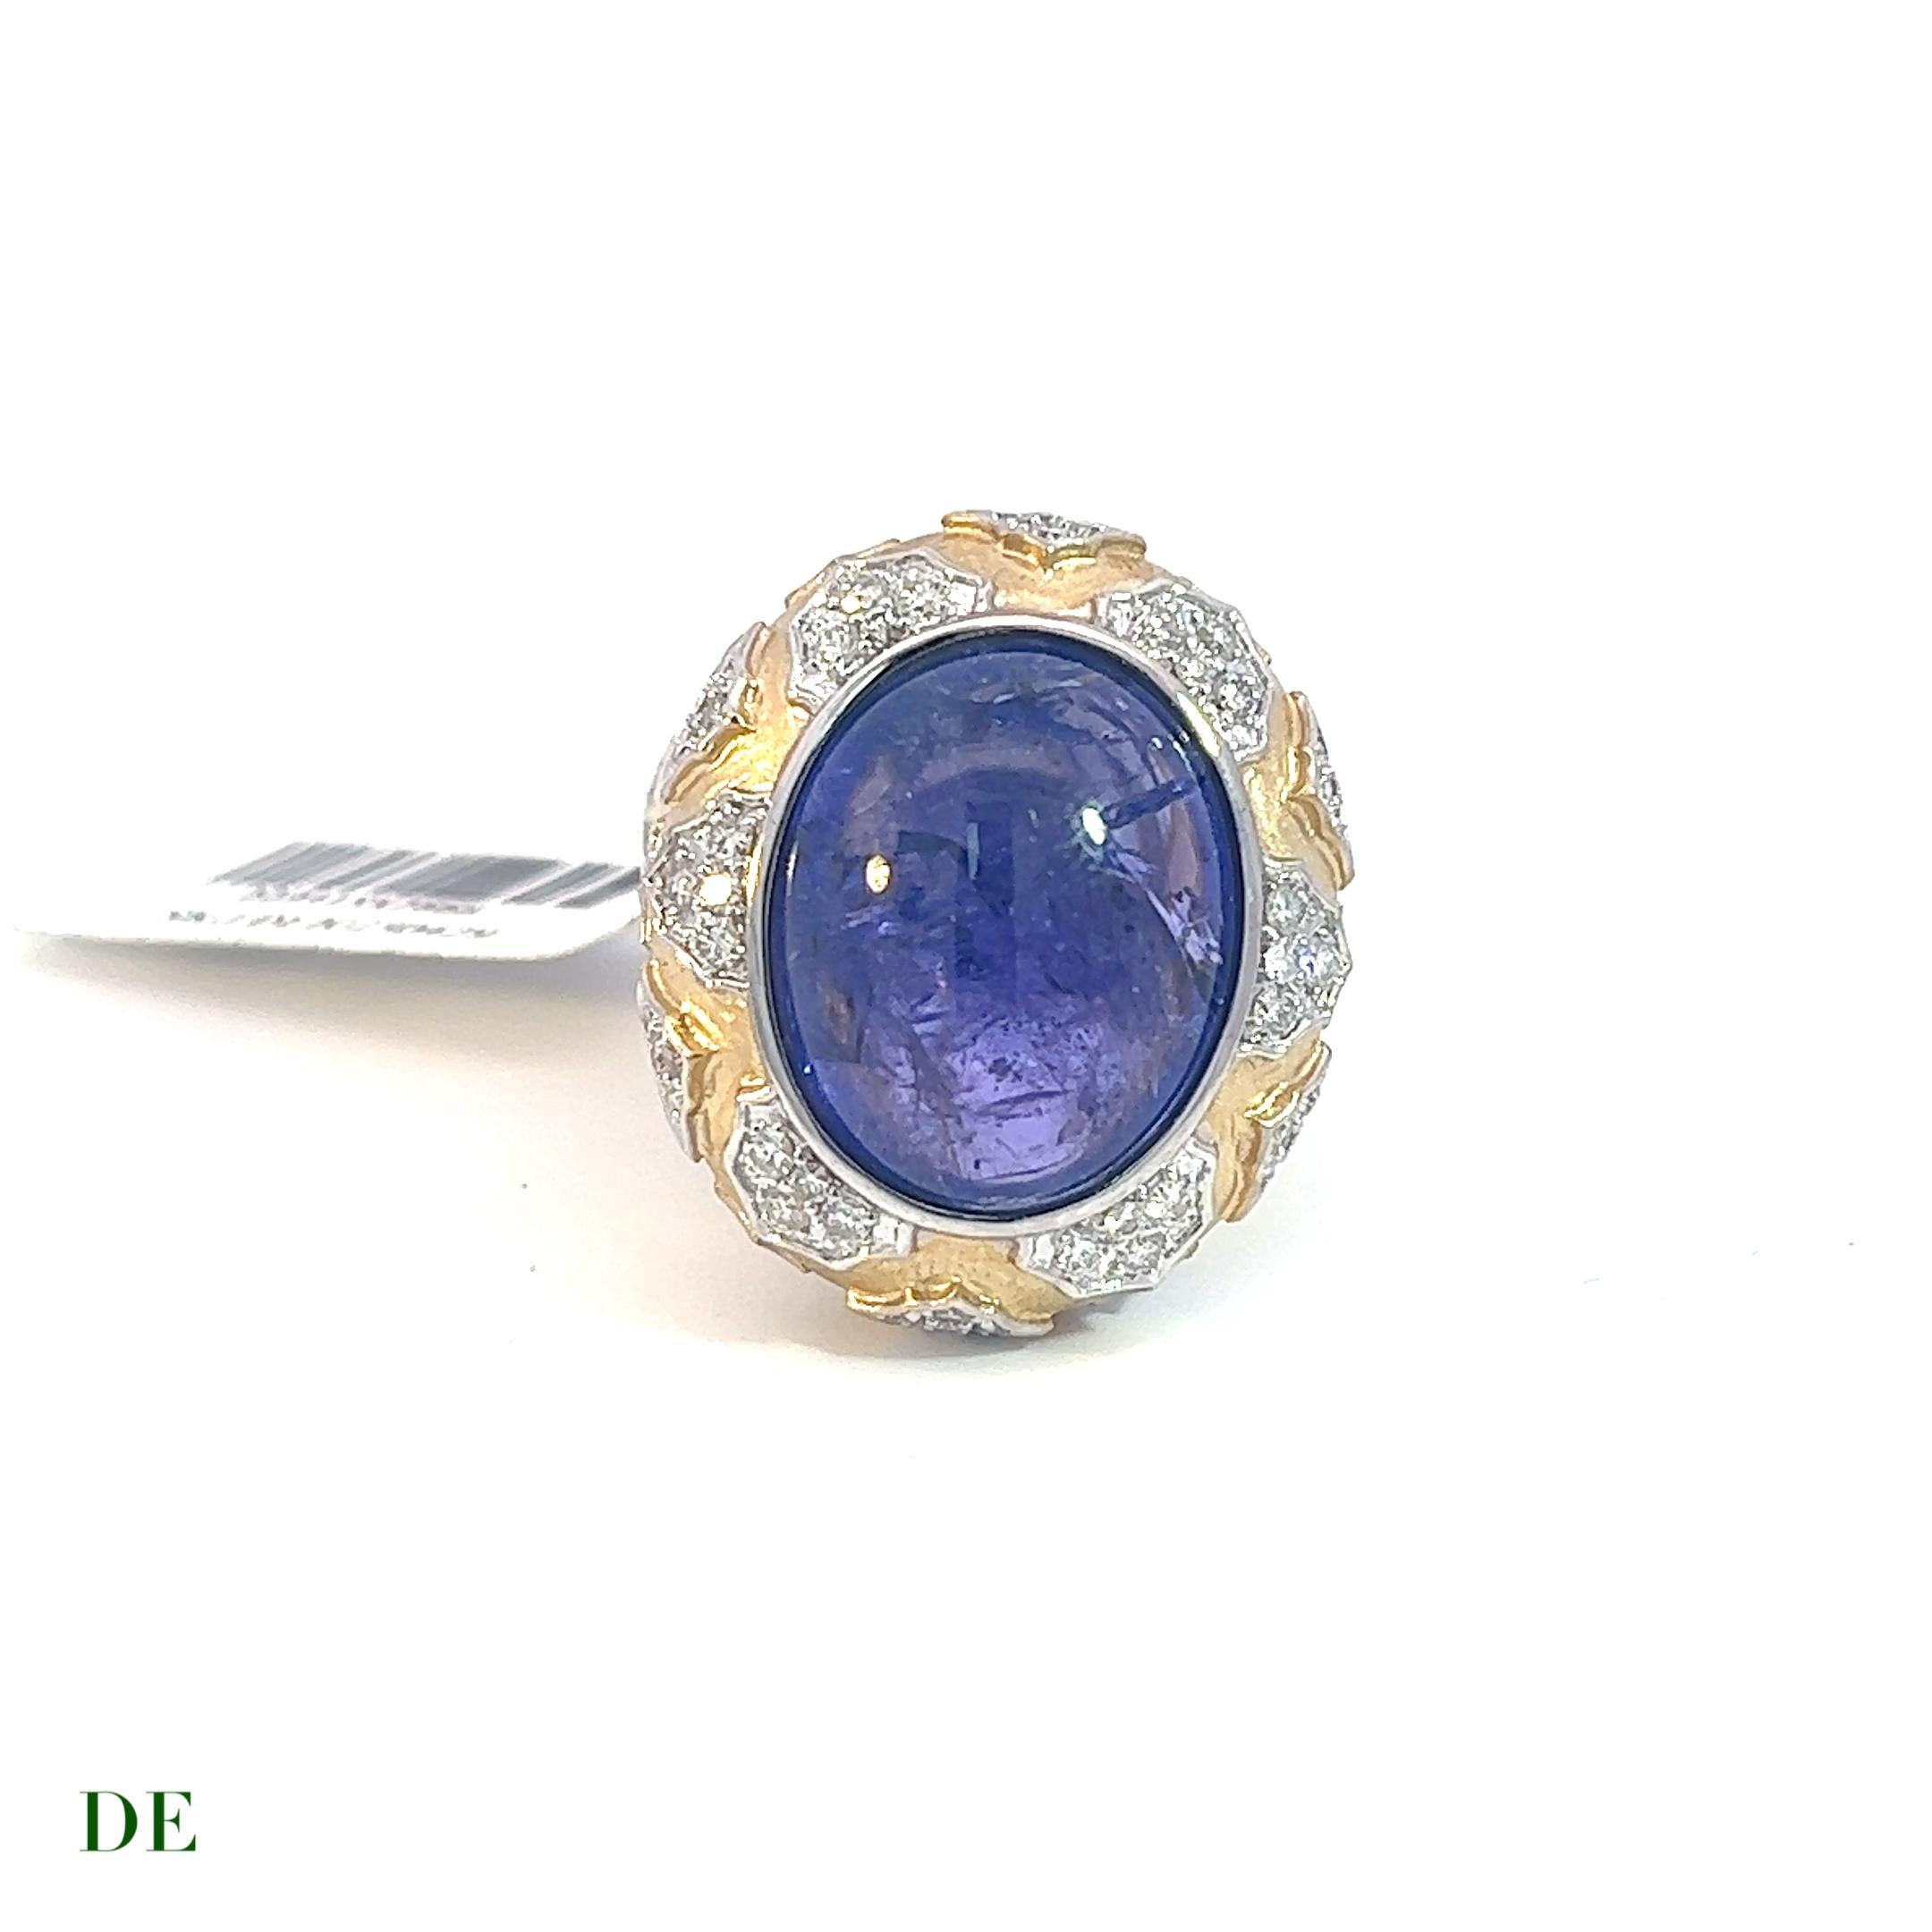 14k Deco 17.05 Crt Tanzanite 1.06 Crt Diamond Engagement Statement Cocktail Ring

Introducing the stunning 14k Deco Tanzanite and Diamond Ring, a true masterpiece that combines the enchanting beauty of a 17.05 carat natural tanzanite with the